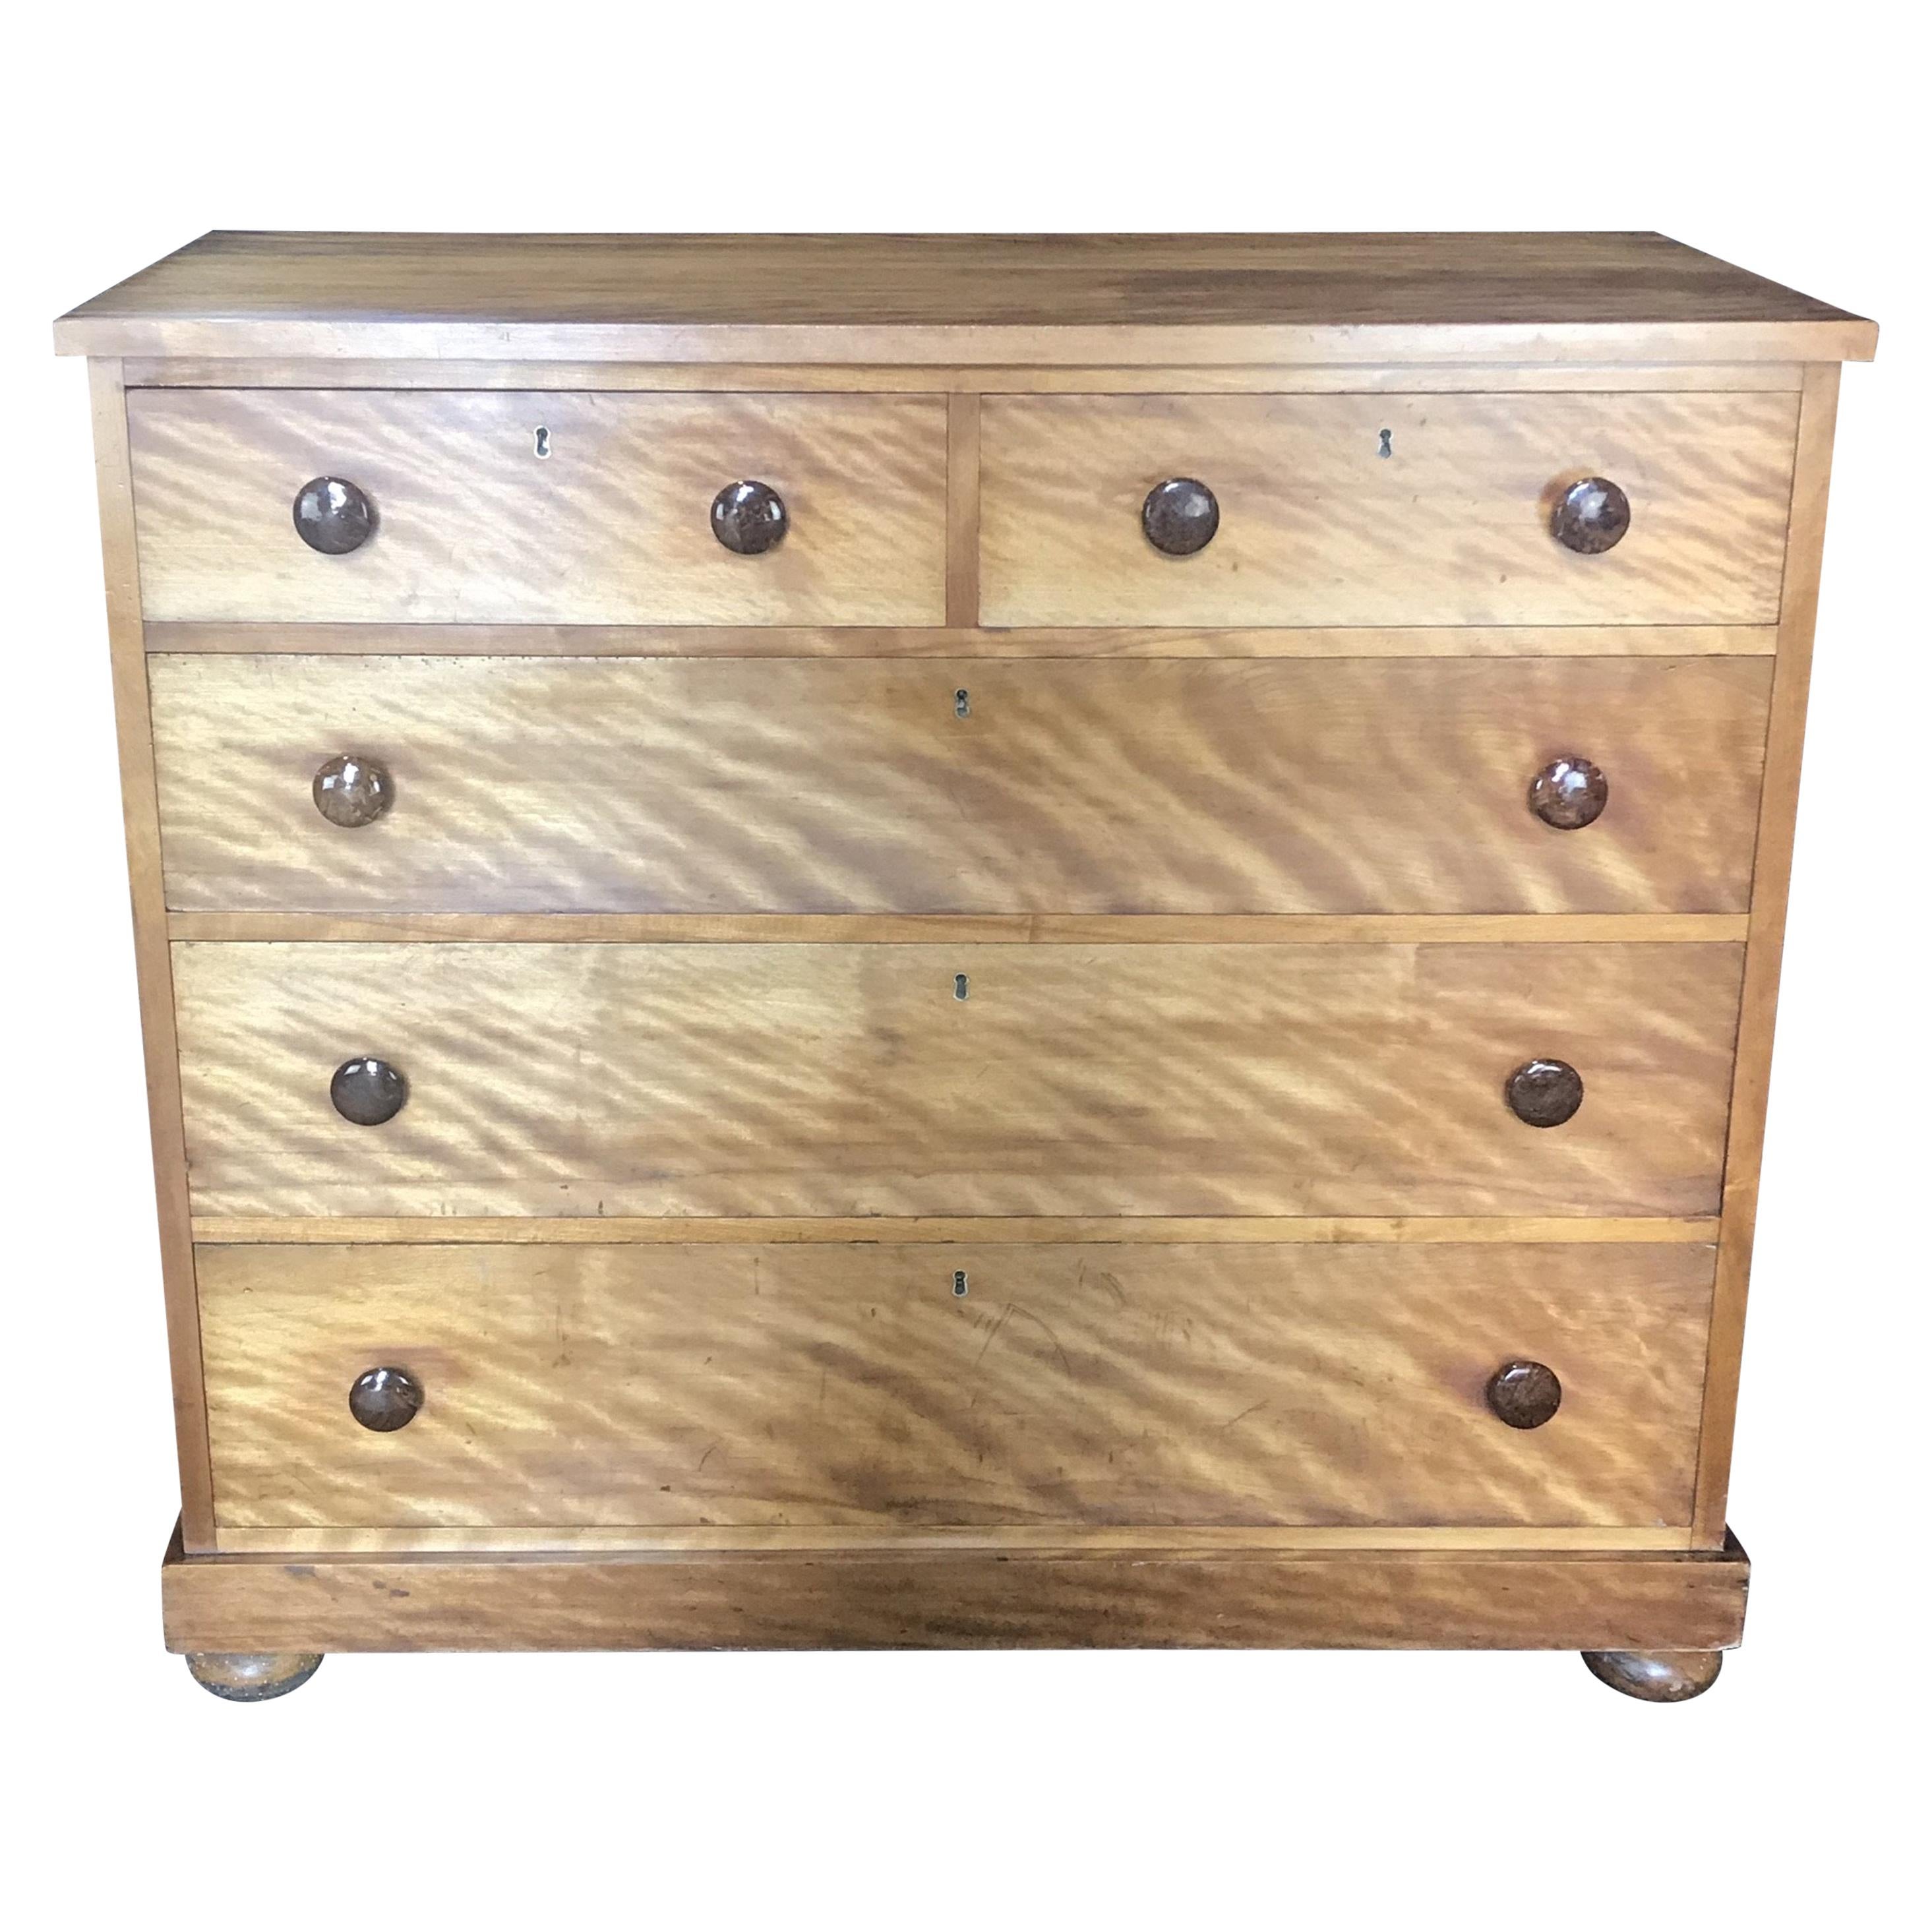 French Tiger's Eye Chest of Drawers Commode with Porcelain Drawer Pulls